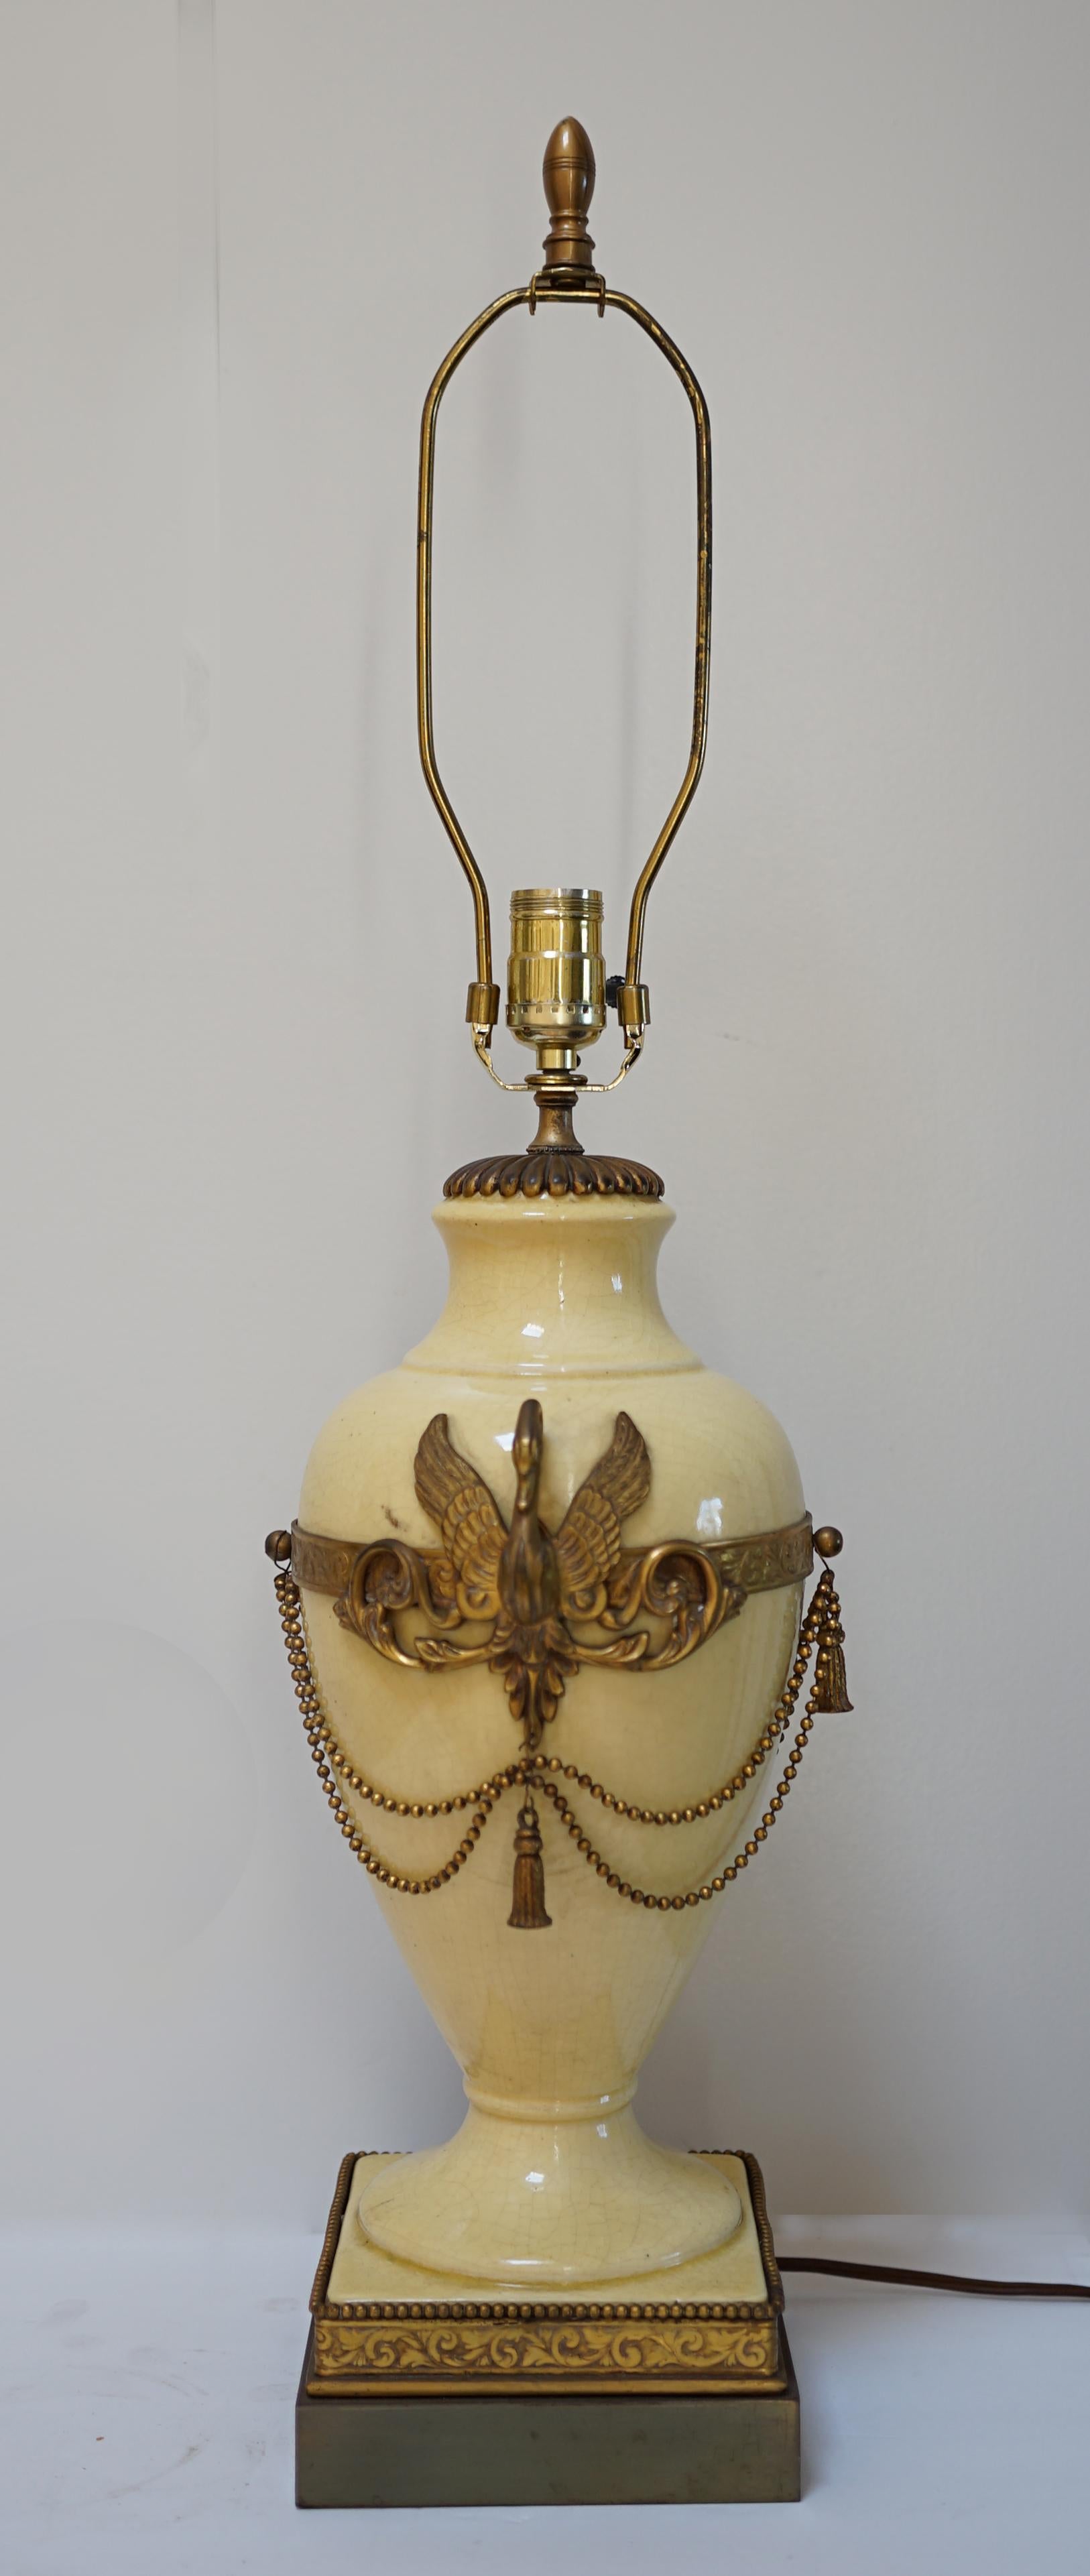 French Empire or Neoclassical Style Gilt Metal Mounted Porcelain Table Lamp In Good Condition For Sale In Lomita, CA